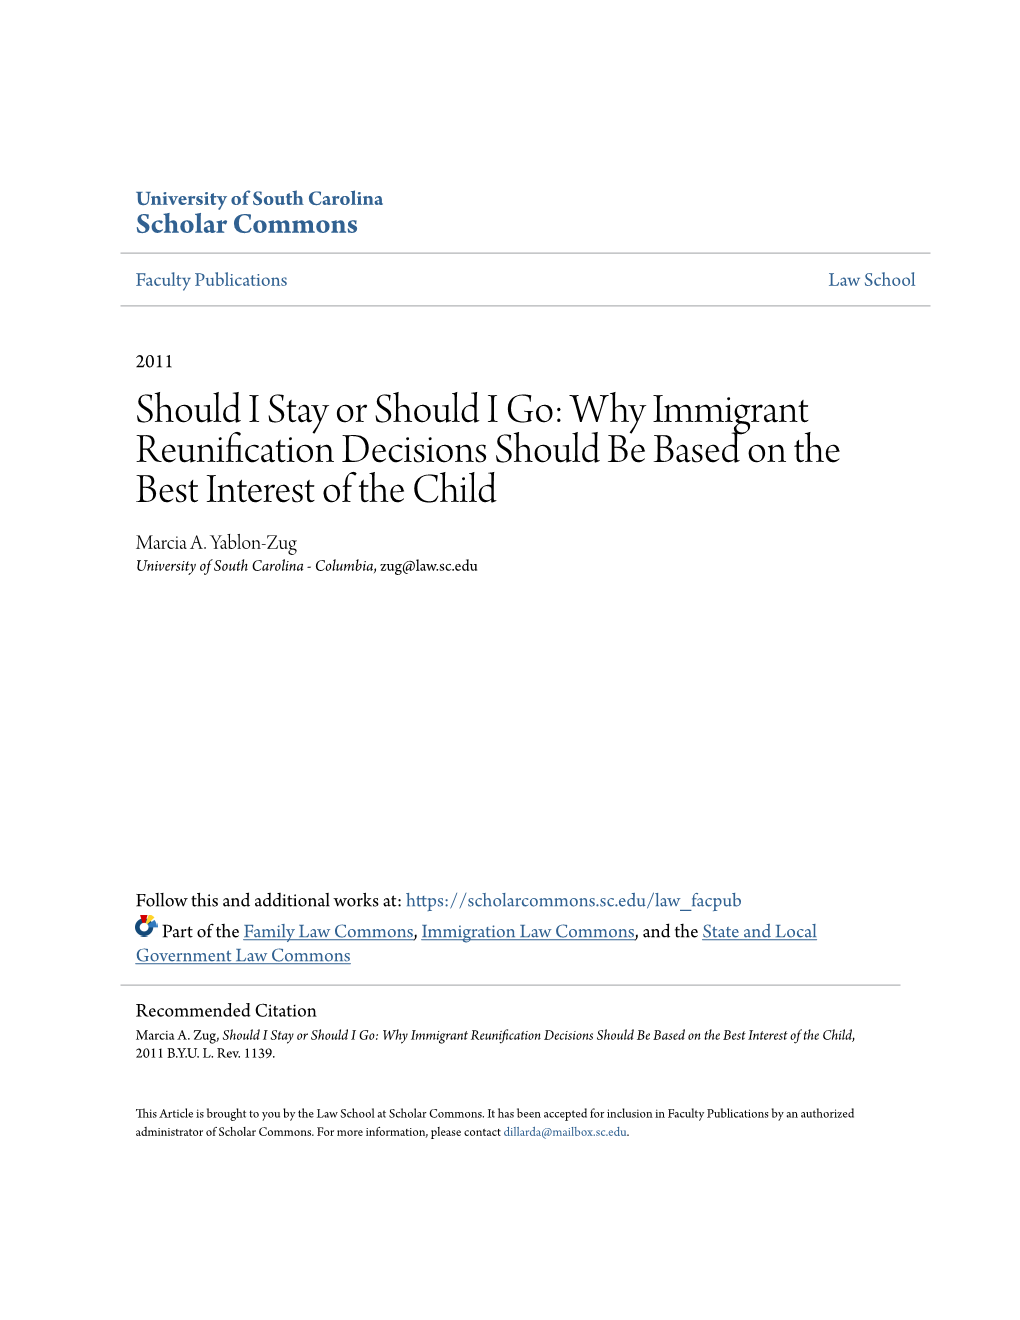 Why Immigrant Reunification Decisions Should Be Based on the Best Interest of the Child Marcia A